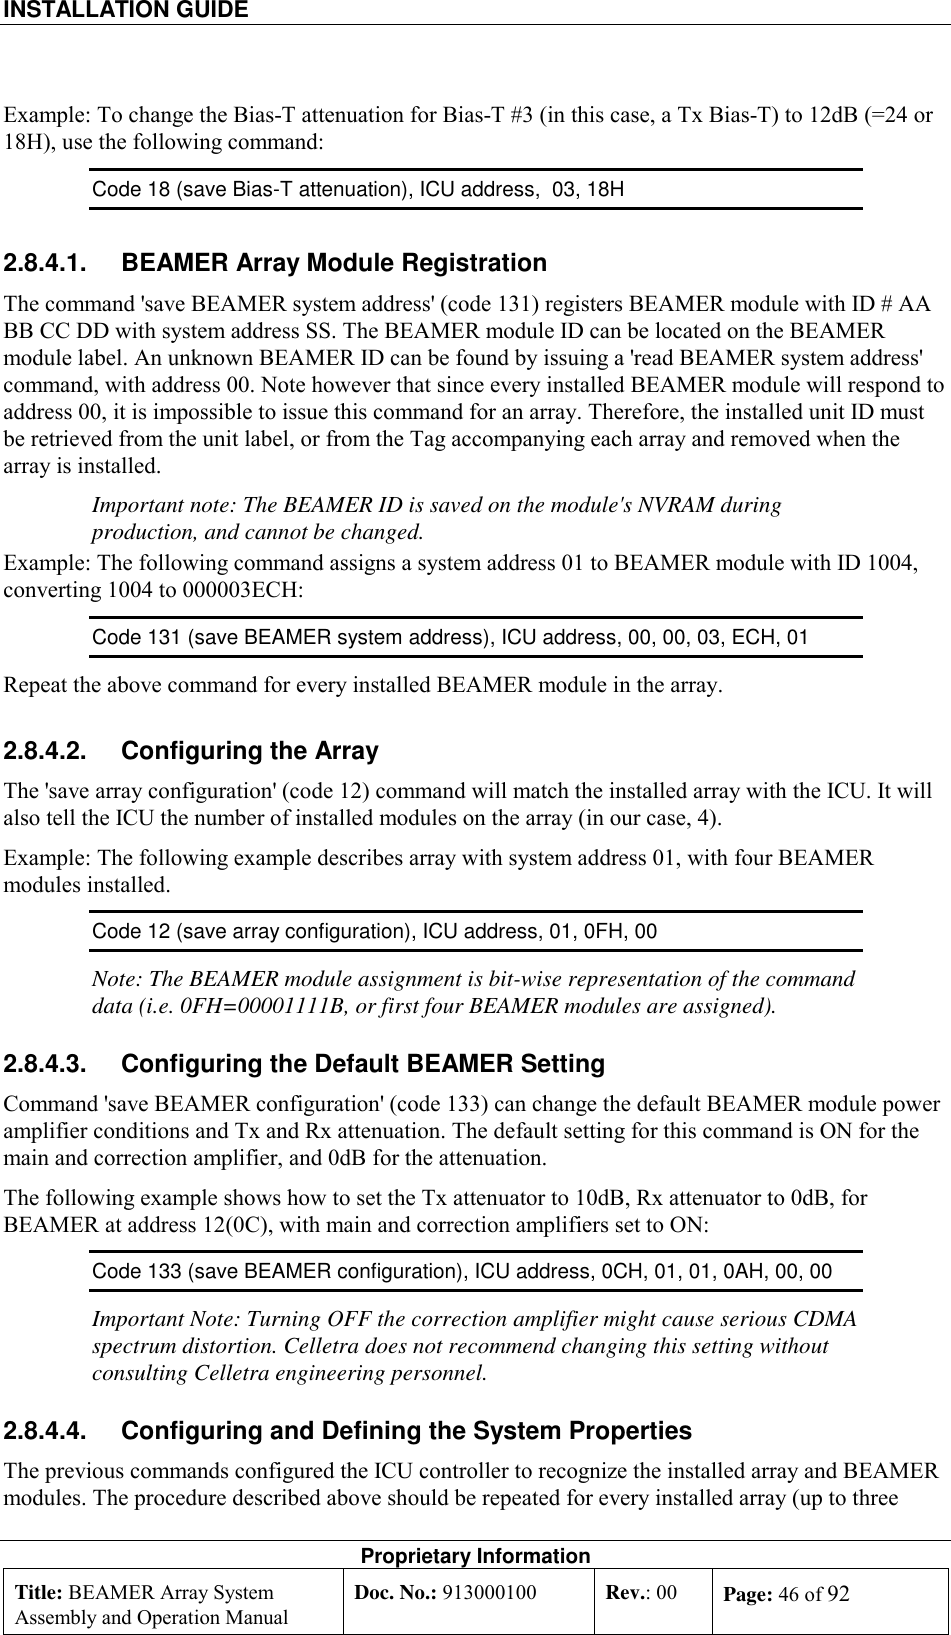 INSTALLATION GUIDE    Proprietary Information Title: BEAMER Array System Assembly and Operation Manual Doc. No.: 913000100  Rev.: 00  Page: 46 of 92  Example: To change the Bias-T attenuation for Bias-T #3 (in this case, a Tx Bias-T) to 12dB (=24 or 18H), use the following command: Code 18 (save Bias-T attenuation), ICU address,  03, 18H  2.8.4.1.  BEAMER Array Module Registration The command &apos;save BEAMER system address&apos; (code 131) registers BEAMER module with ID # AA BB CC DD with system address SS. The BEAMER module ID can be located on the BEAMER module label. An unknown BEAMER ID can be found by issuing a &apos;read BEAMER system address&apos; command, with address 00. Note however that since every installed BEAMER module will respond to address 00, it is impossible to issue this command for an array. Therefore, the installed unit ID must be retrieved from the unit label, or from the Tag accompanying each array and removed when the array is installed. Important note: The BEAMER ID is saved on the module&apos;s NVRAM during production, and cannot be changed. Example: The following command assigns a system address 01 to BEAMER module with ID 1004,  converting 1004 to 000003ECH: Code 131 (save BEAMER system address), ICU address, 00, 00, 03, ECH, 01   Repeat the above command for every installed BEAMER module in the array. 2.8.4.2.  Configuring the Array The &apos;save array configuration&apos; (code 12) command will match the installed array with the ICU. It will also tell the ICU the number of installed modules on the array (in our case, 4).  Example: The following example describes array with system address 01, with four BEAMER modules installed. Code 12 (save array configuration), ICU address, 01, 0FH, 00   Note: The BEAMER module assignment is bit-wise representation of the command data (i.e. 0FH=00001111B, or first four BEAMER modules are assigned). 2.8.4.3.  Configuring the Default BEAMER Setting Command &apos;save BEAMER configuration&apos; (code 133) can change the default BEAMER module power amplifier conditions and Tx and Rx attenuation. The default setting for this command is ON for the main and correction amplifier, and 0dB for the attenuation.  The following example shows how to set the Tx attenuator to 10dB, Rx attenuator to 0dB, for BEAMER at address 12(0C), with main and correction amplifiers set to ON: Code 133 (save BEAMER configuration), ICU address, 0CH, 01, 01, 0AH, 00, 00 Important Note: Turning OFF the correction amplifier might cause serious CDMA spectrum distortion. Celletra does not recommend changing this setting without consulting Celletra engineering personnel. 2.8.4.4.  Configuring and Defining the System Properties The previous commands configured the ICU controller to recognize the installed array and BEAMER modules. The procedure described above should be repeated for every installed array (up to three 